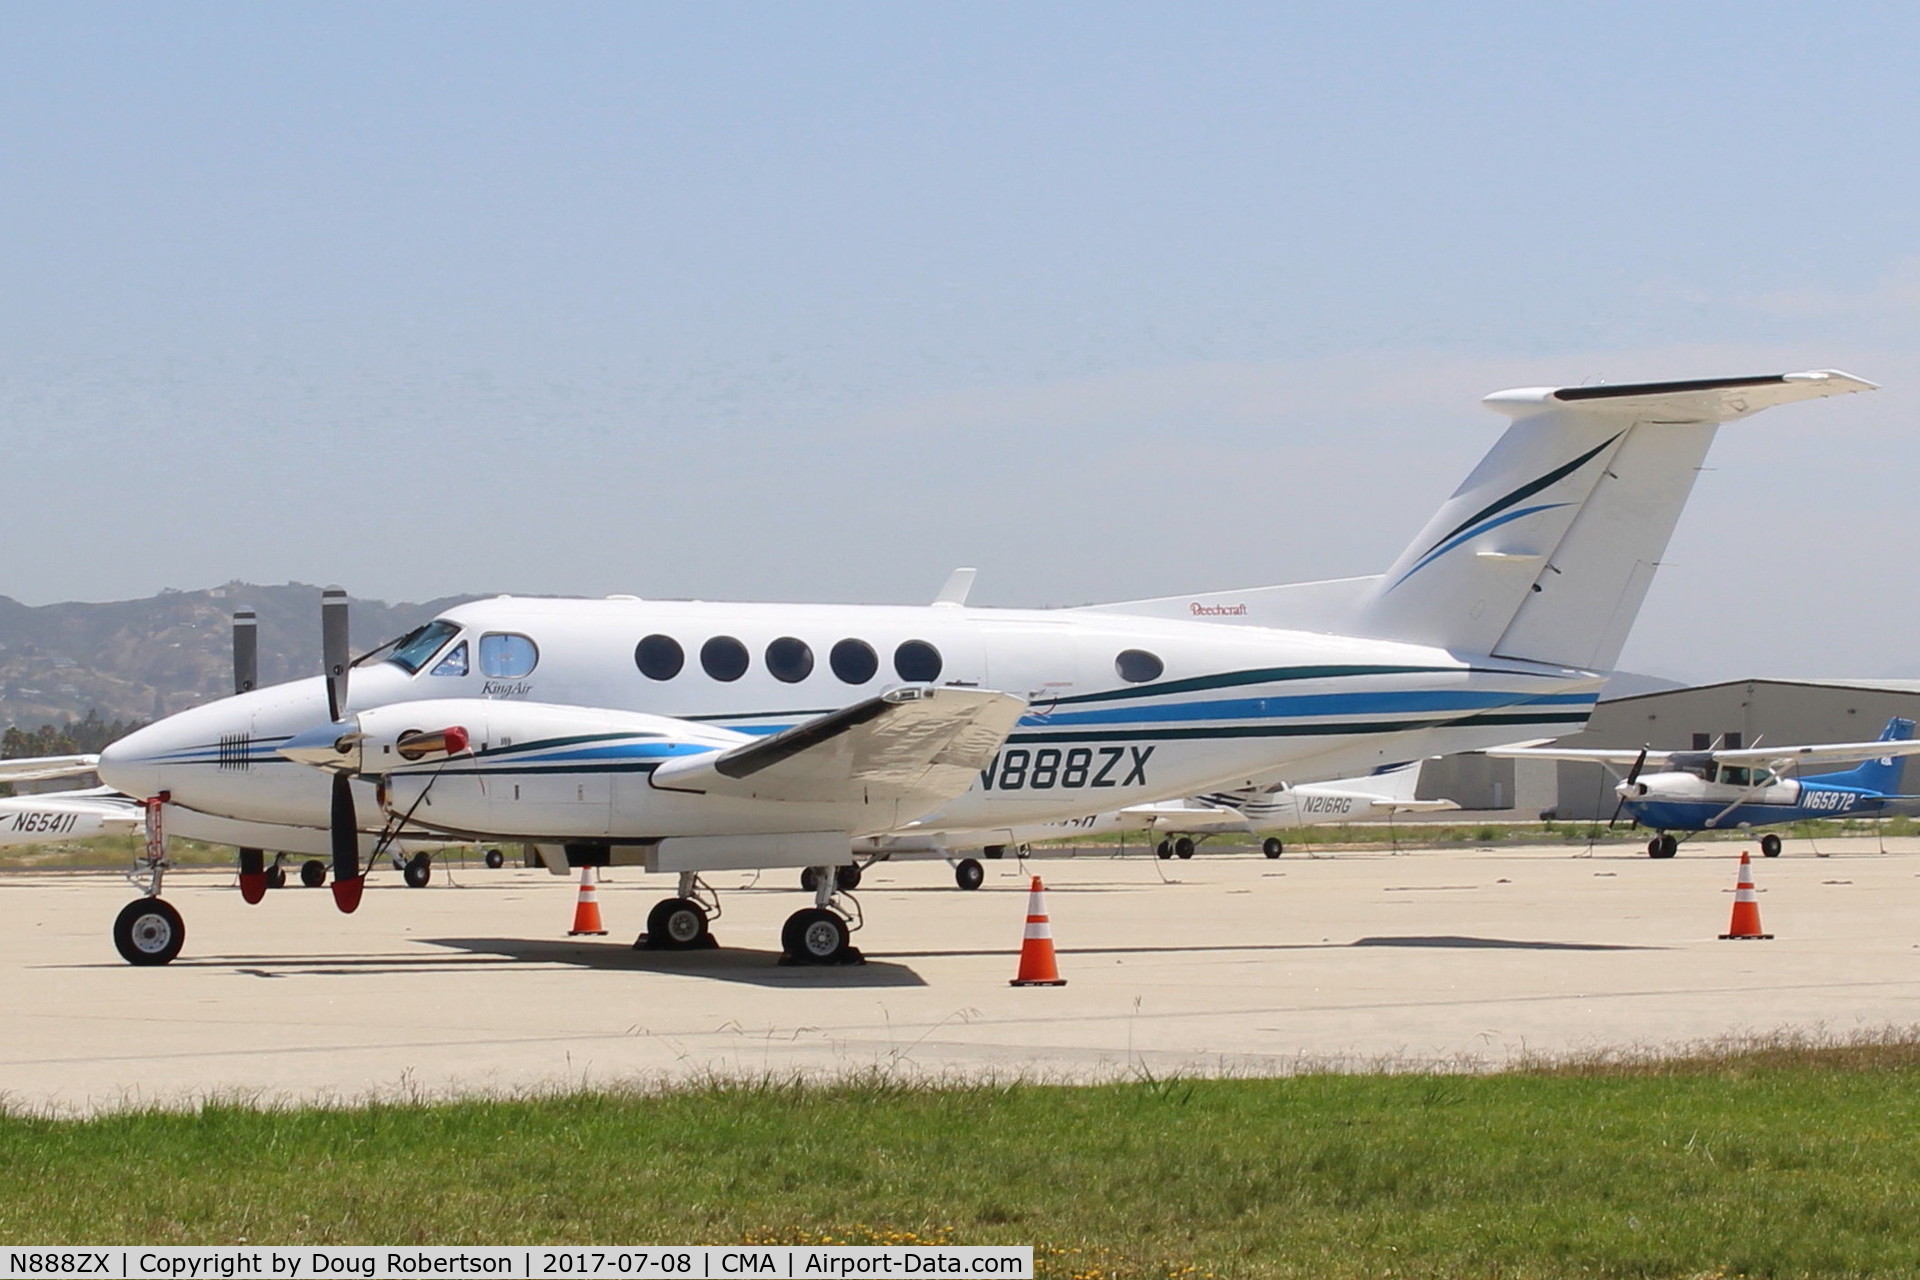 N888ZX, 1983 Beech B200 King Air C/N BB-1140, 1983 Beech B200 KING AIR, two U/A Canada PT6A-41 turboprops rated 850 sHp each, NOTE: Experimental class registration/certification.